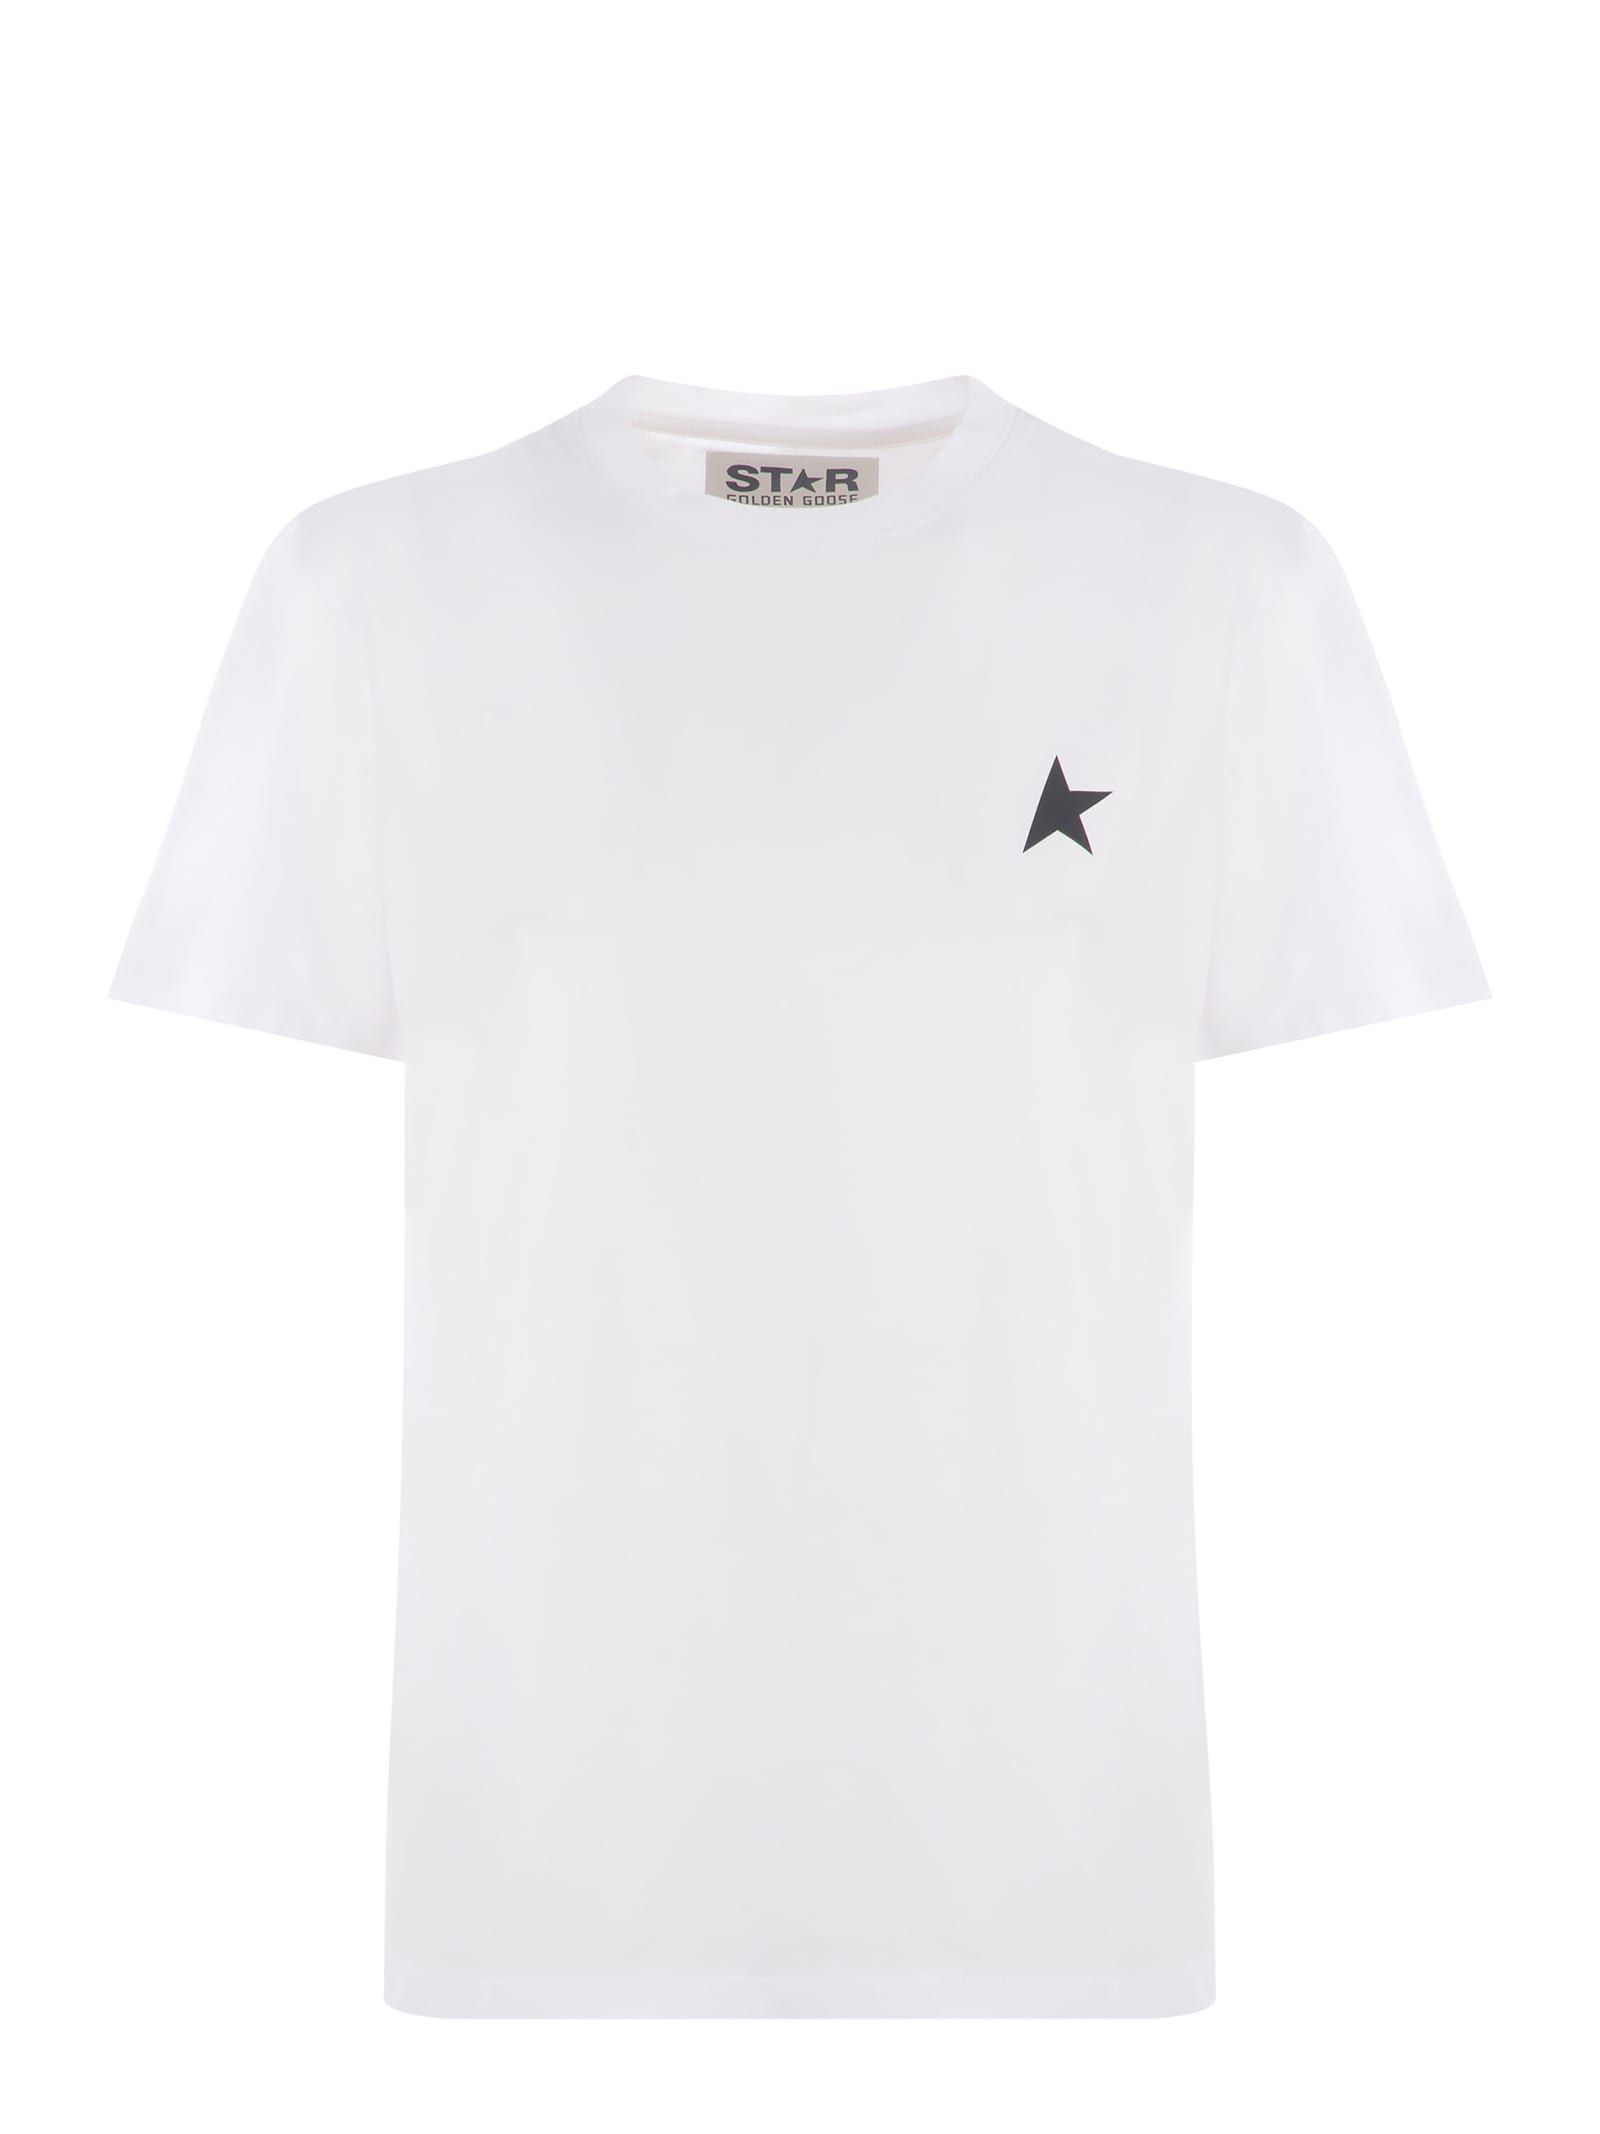 Golden Goose T-shirt  Star Made Of Cotton In White